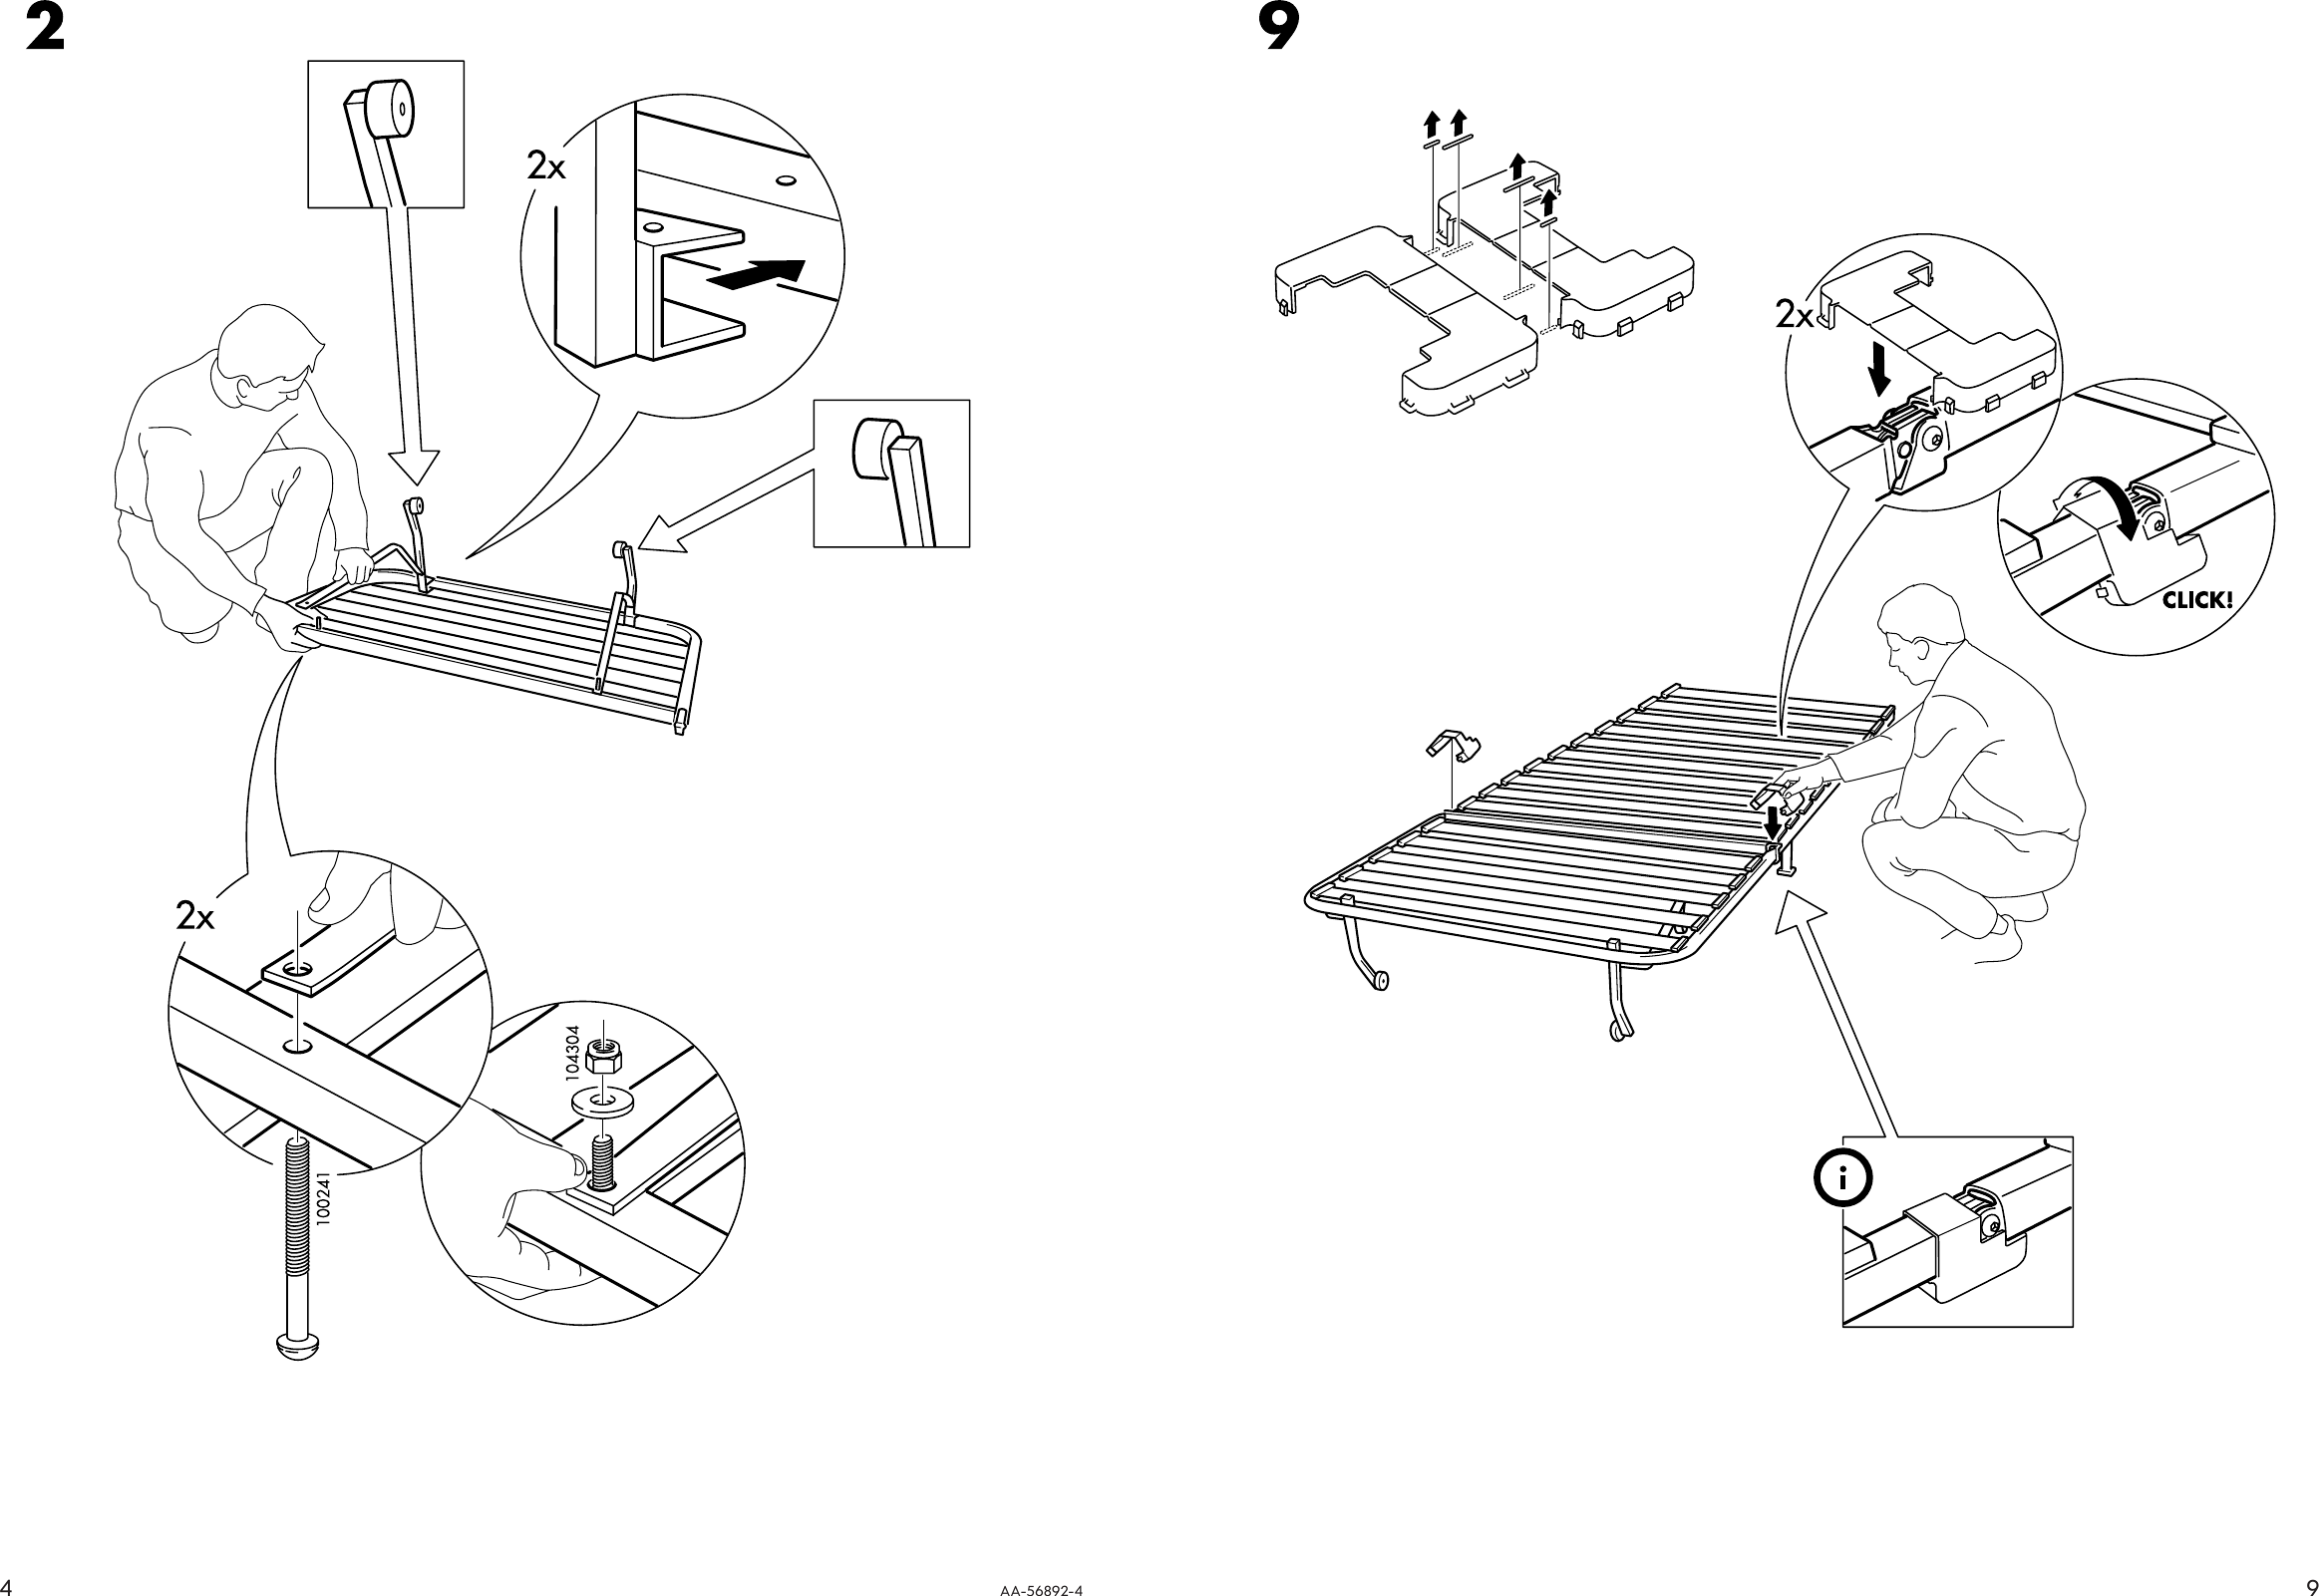 Page 4 of 6 - Ikea Ikea-Lycksele-Frame-Chair-Bed-Assembly-Instruction